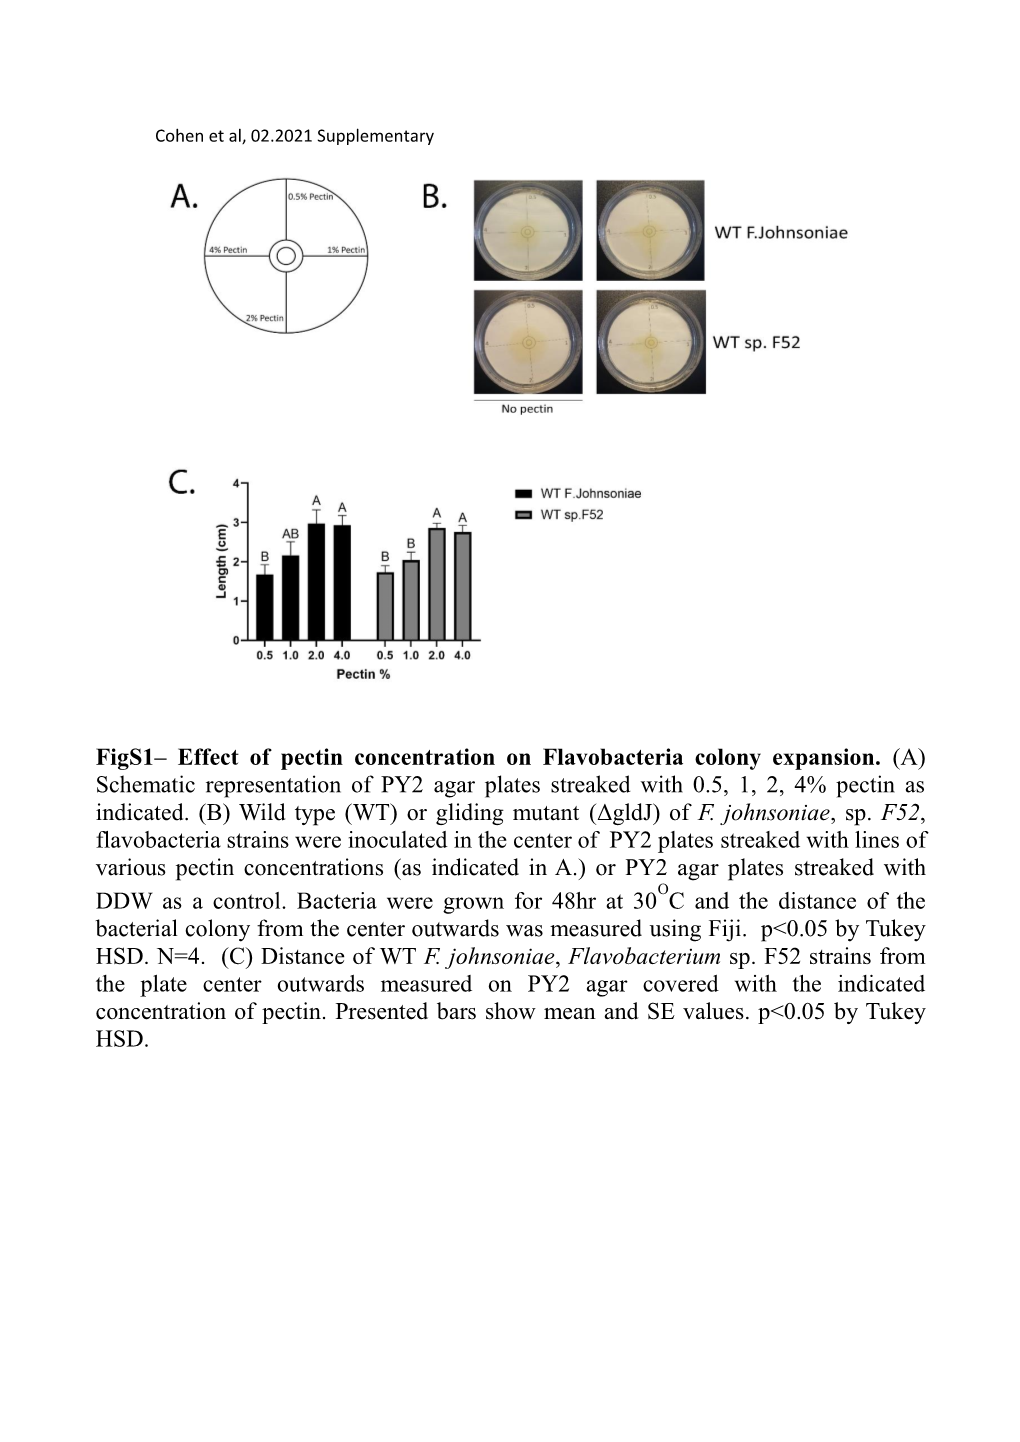 Figs1– Effect of Pectin Concentration on Flavobacteria Colony Expansion